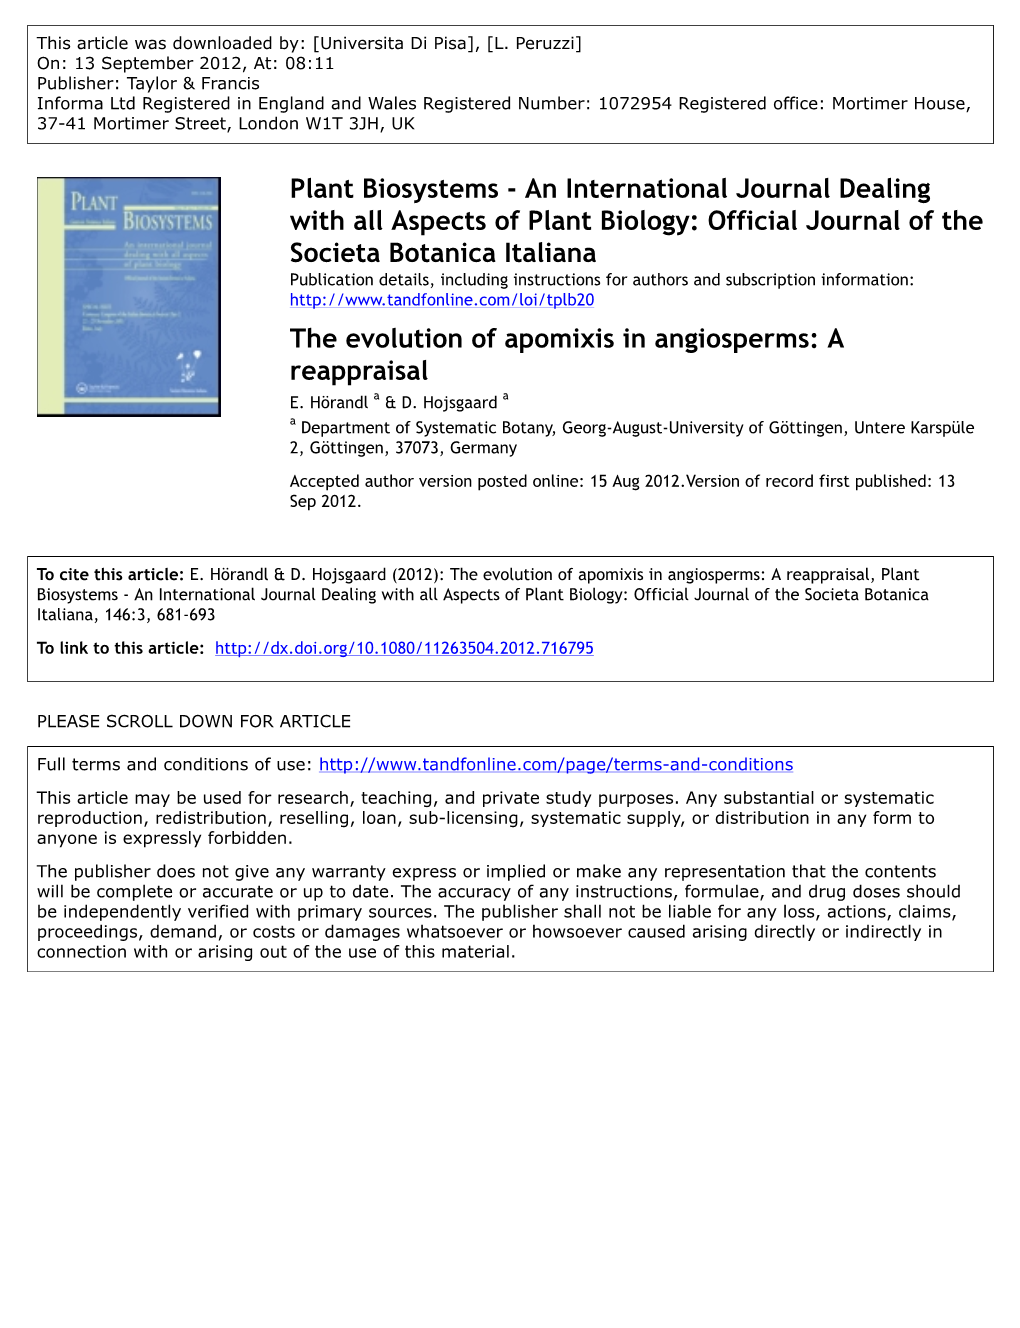 The Evolution of Apomixis in Angiosperms: a Reappraisal E